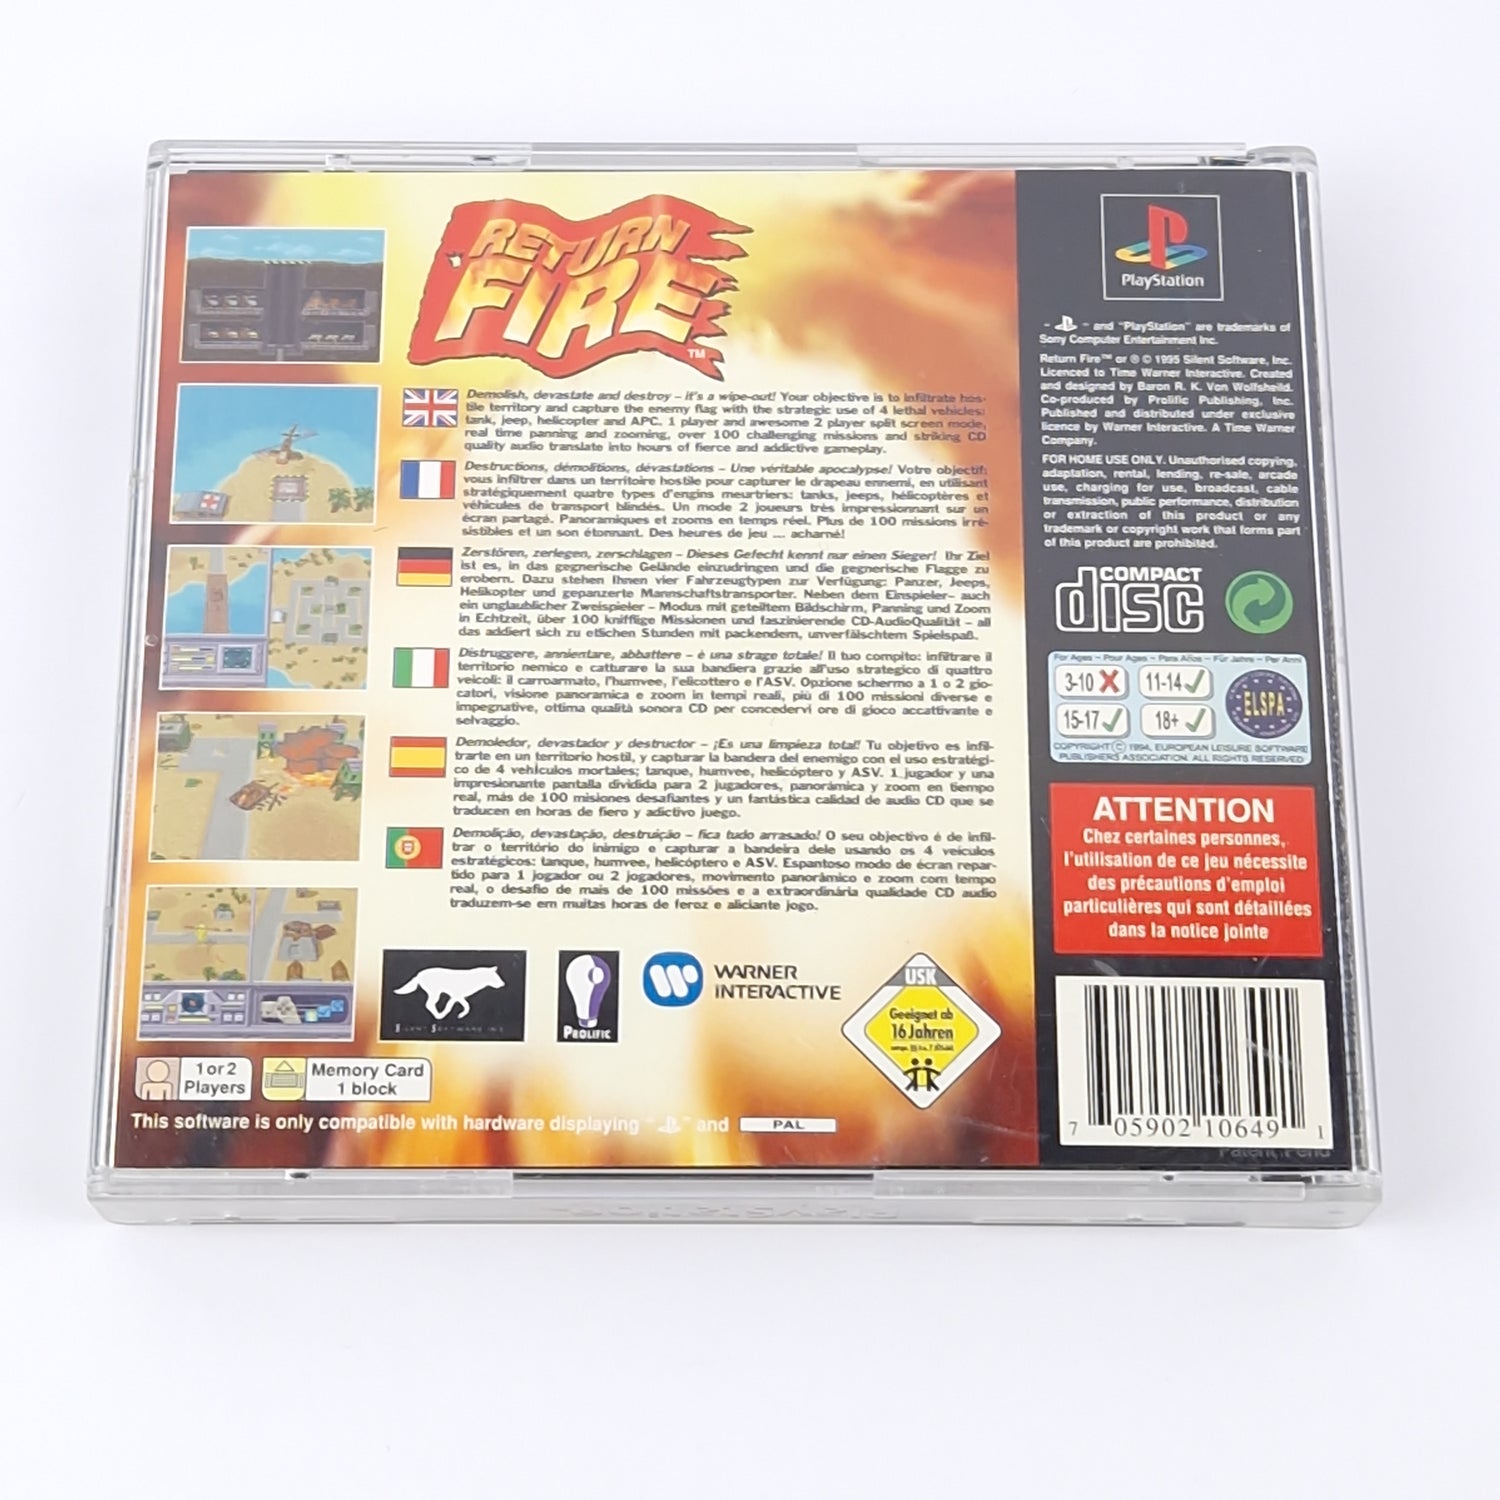 Sony Playstation 1 Spiel : Return Fire - OVP Anleitung CD - PS1 PSX PAL Game